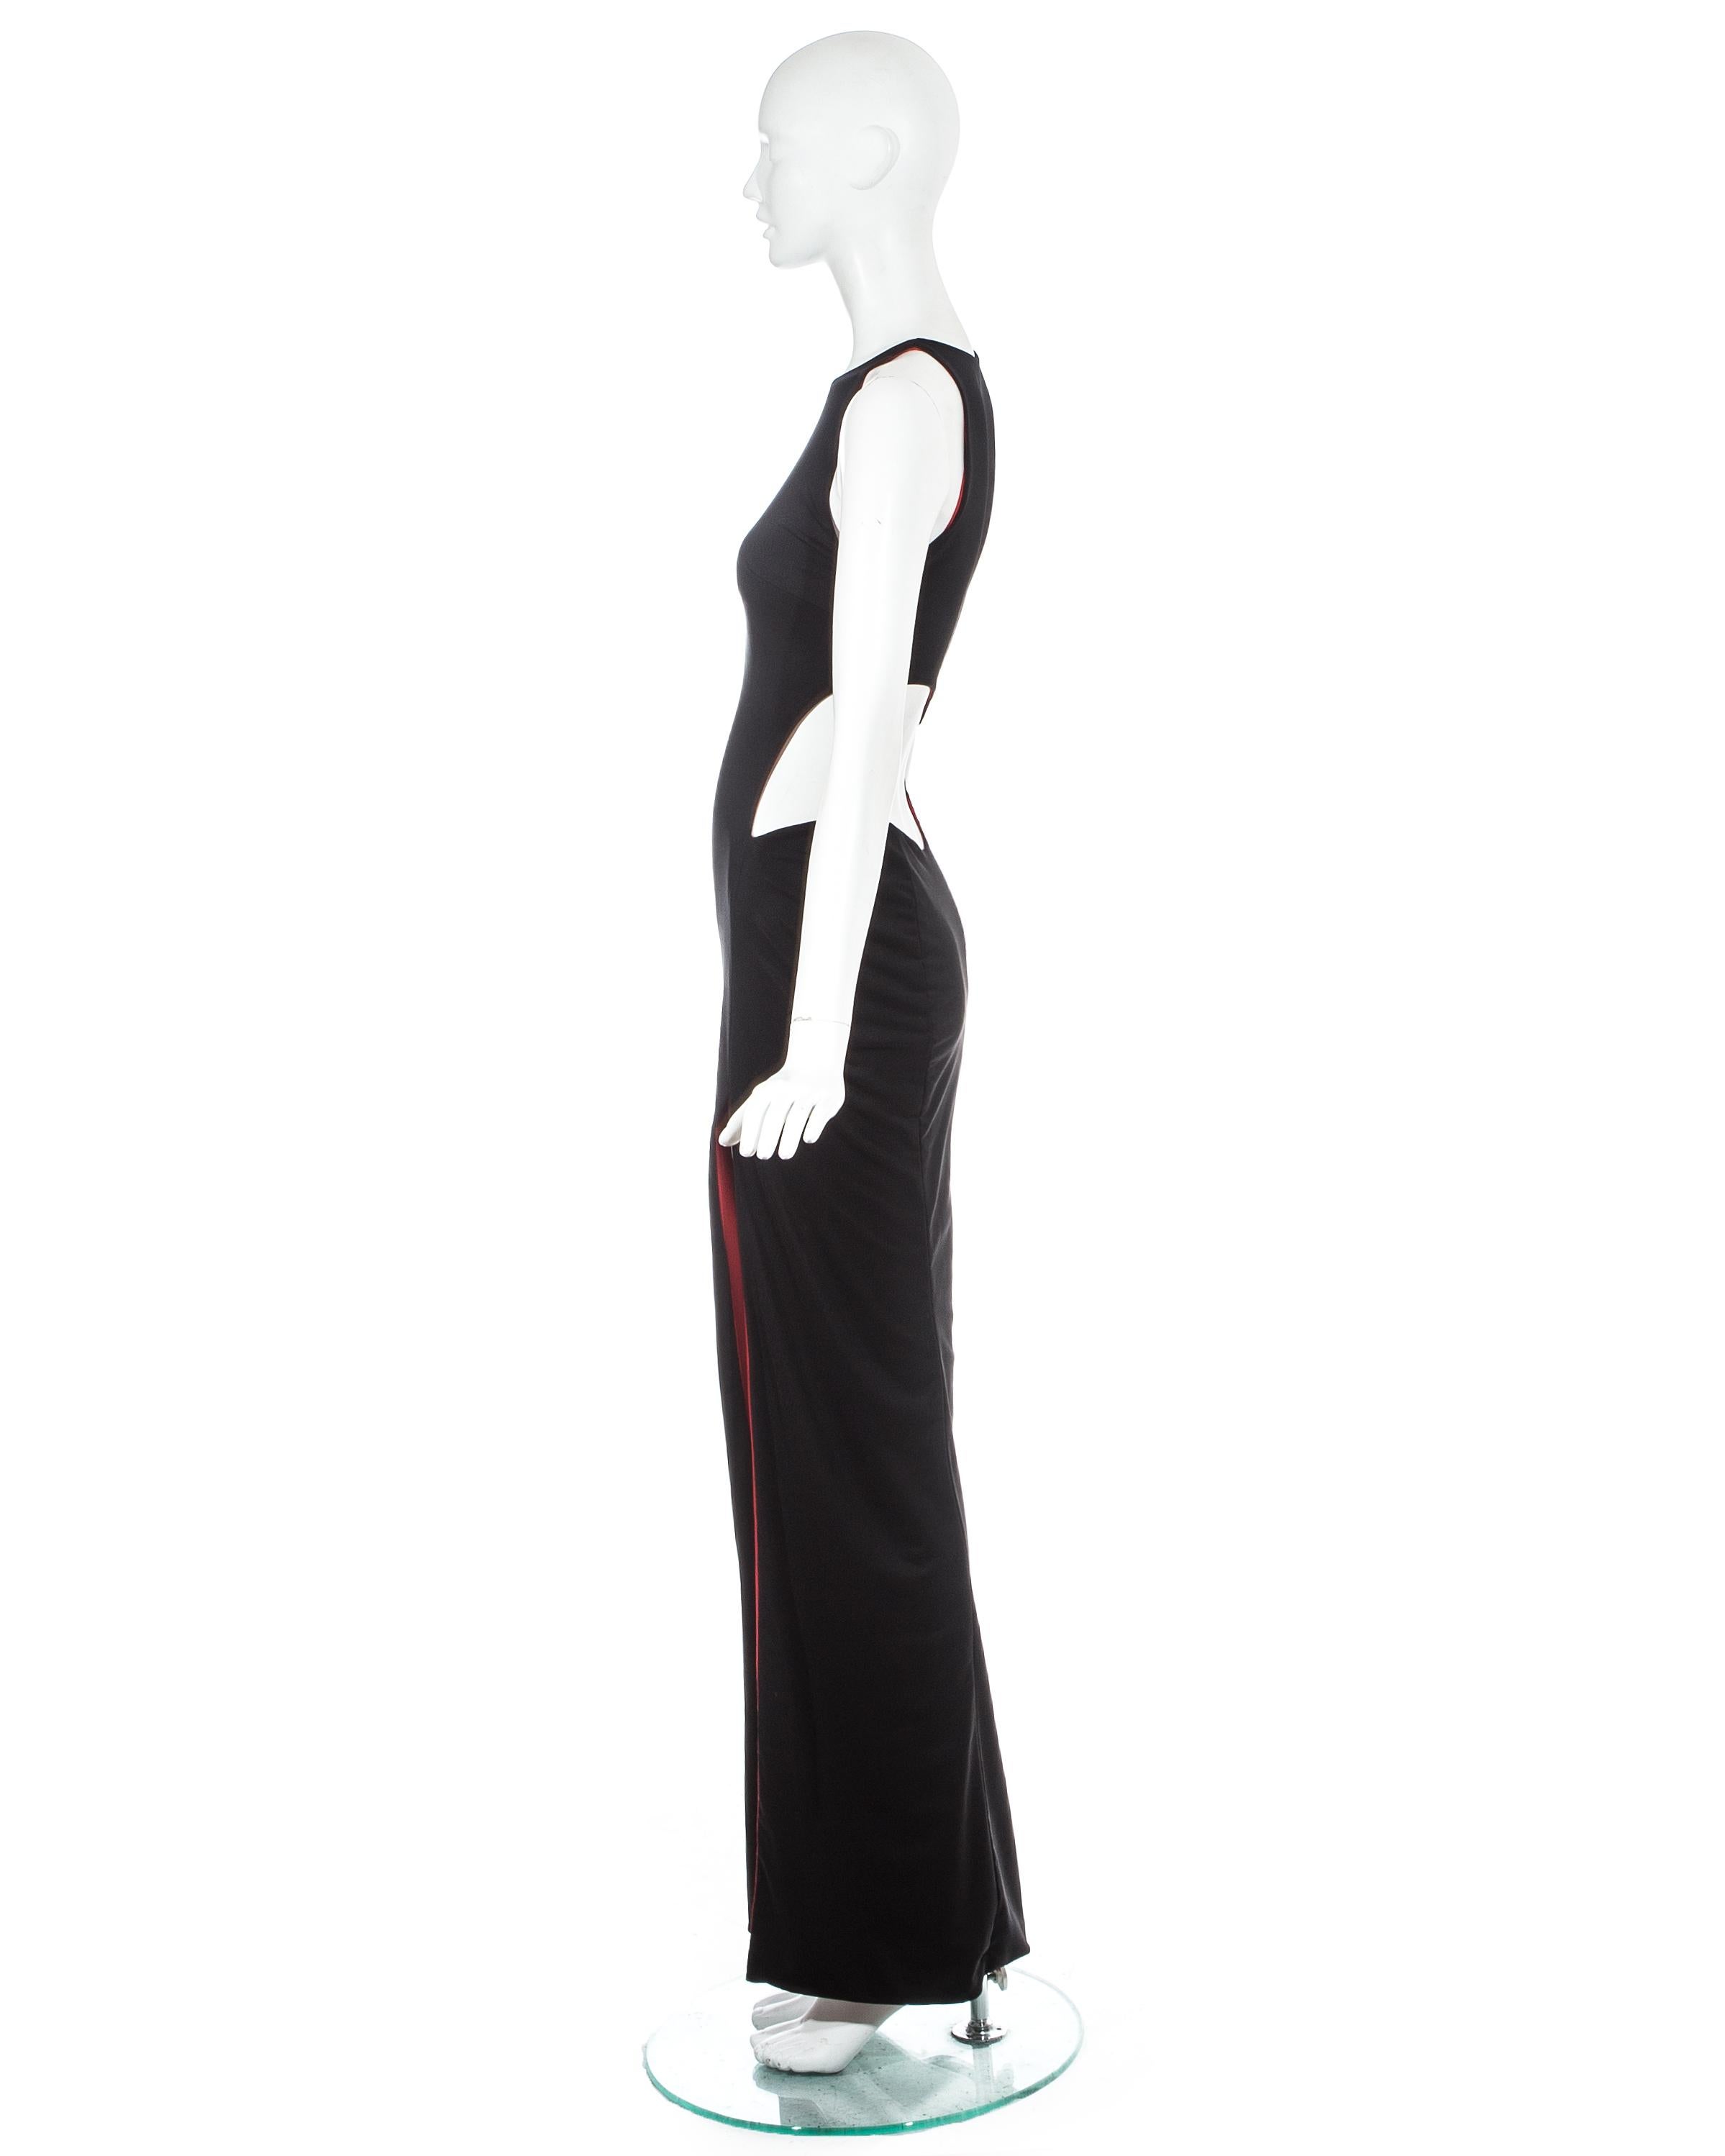 Women's Gianni Versace black jersey evening dress with cut out and leg slit, ss 1998